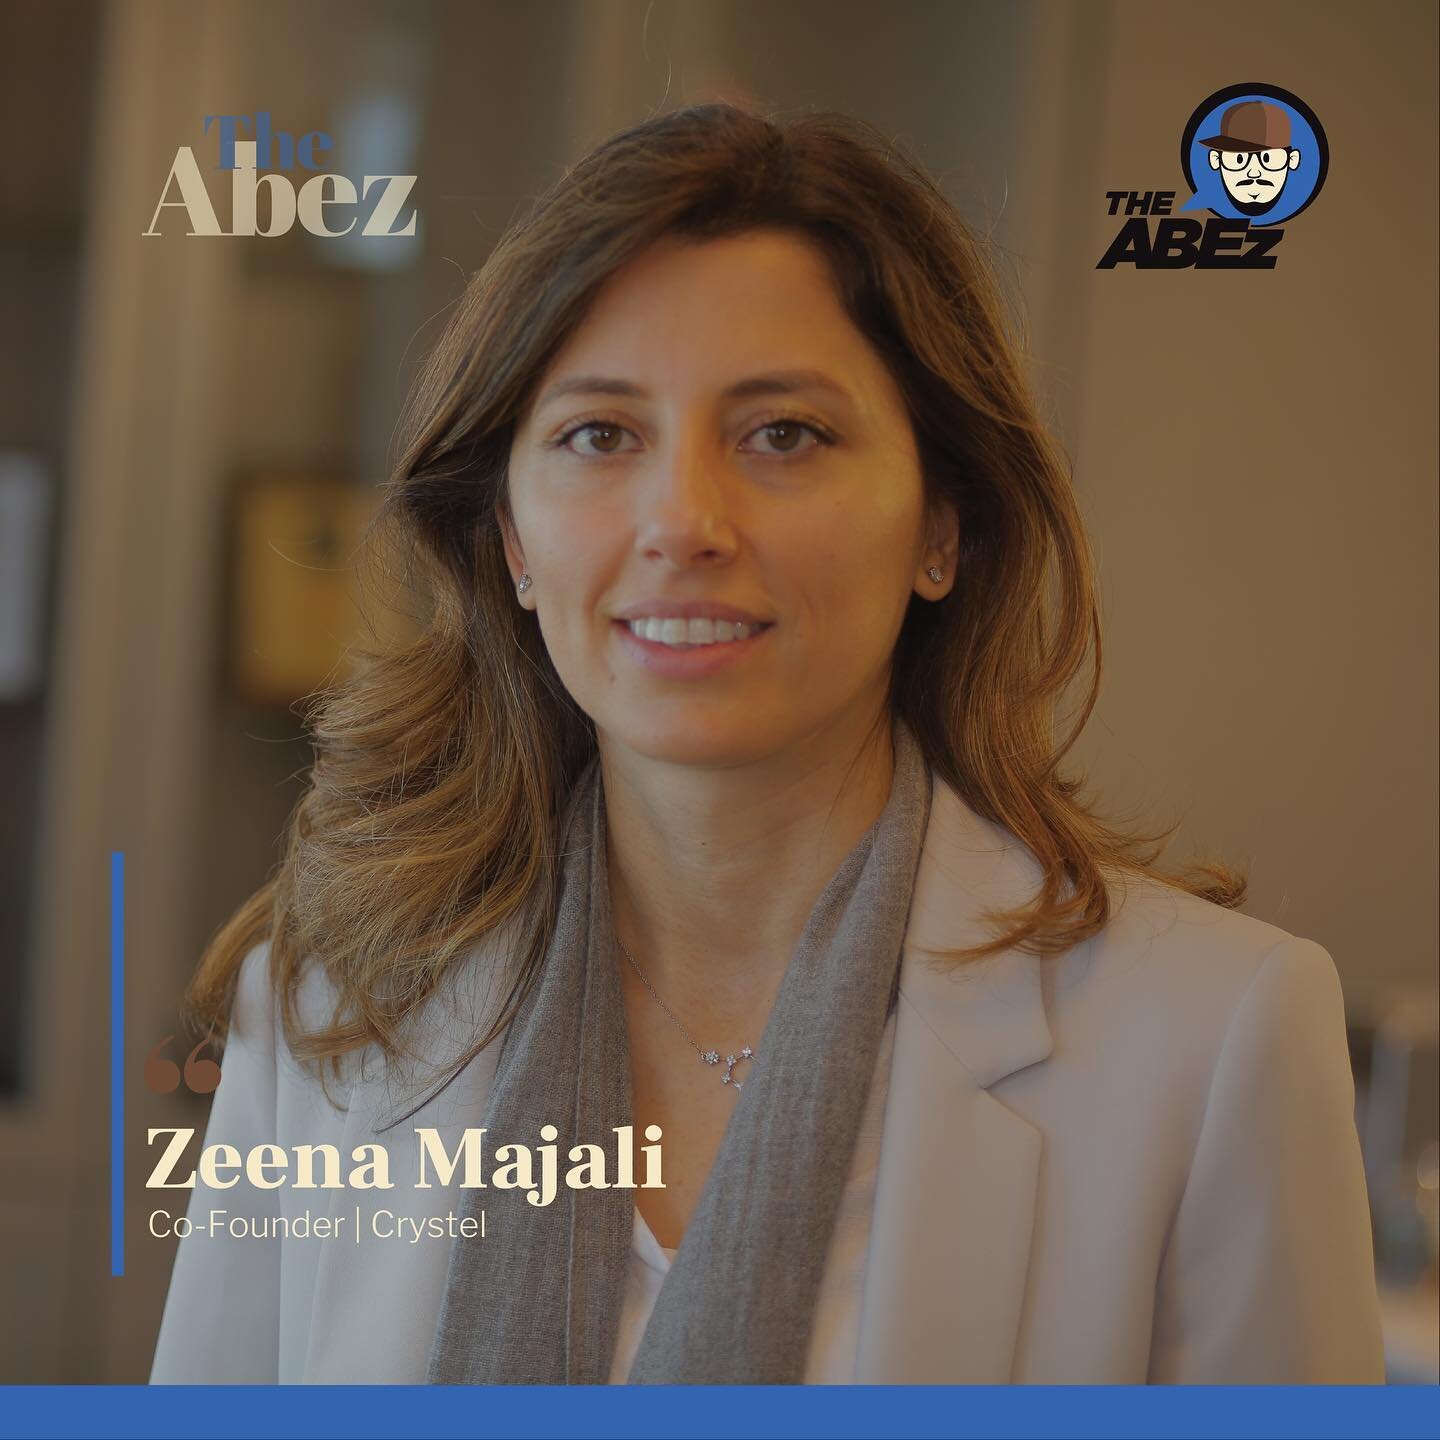 Happy Sunday! 🌿 One of this weeks guests is @zeenamajali Co-Founder of @crystel.jo the first independent multilingual outsourcing contact center in Jordan. 

After working in the fields of market research and advertising in Jordan and the US, Zeena 